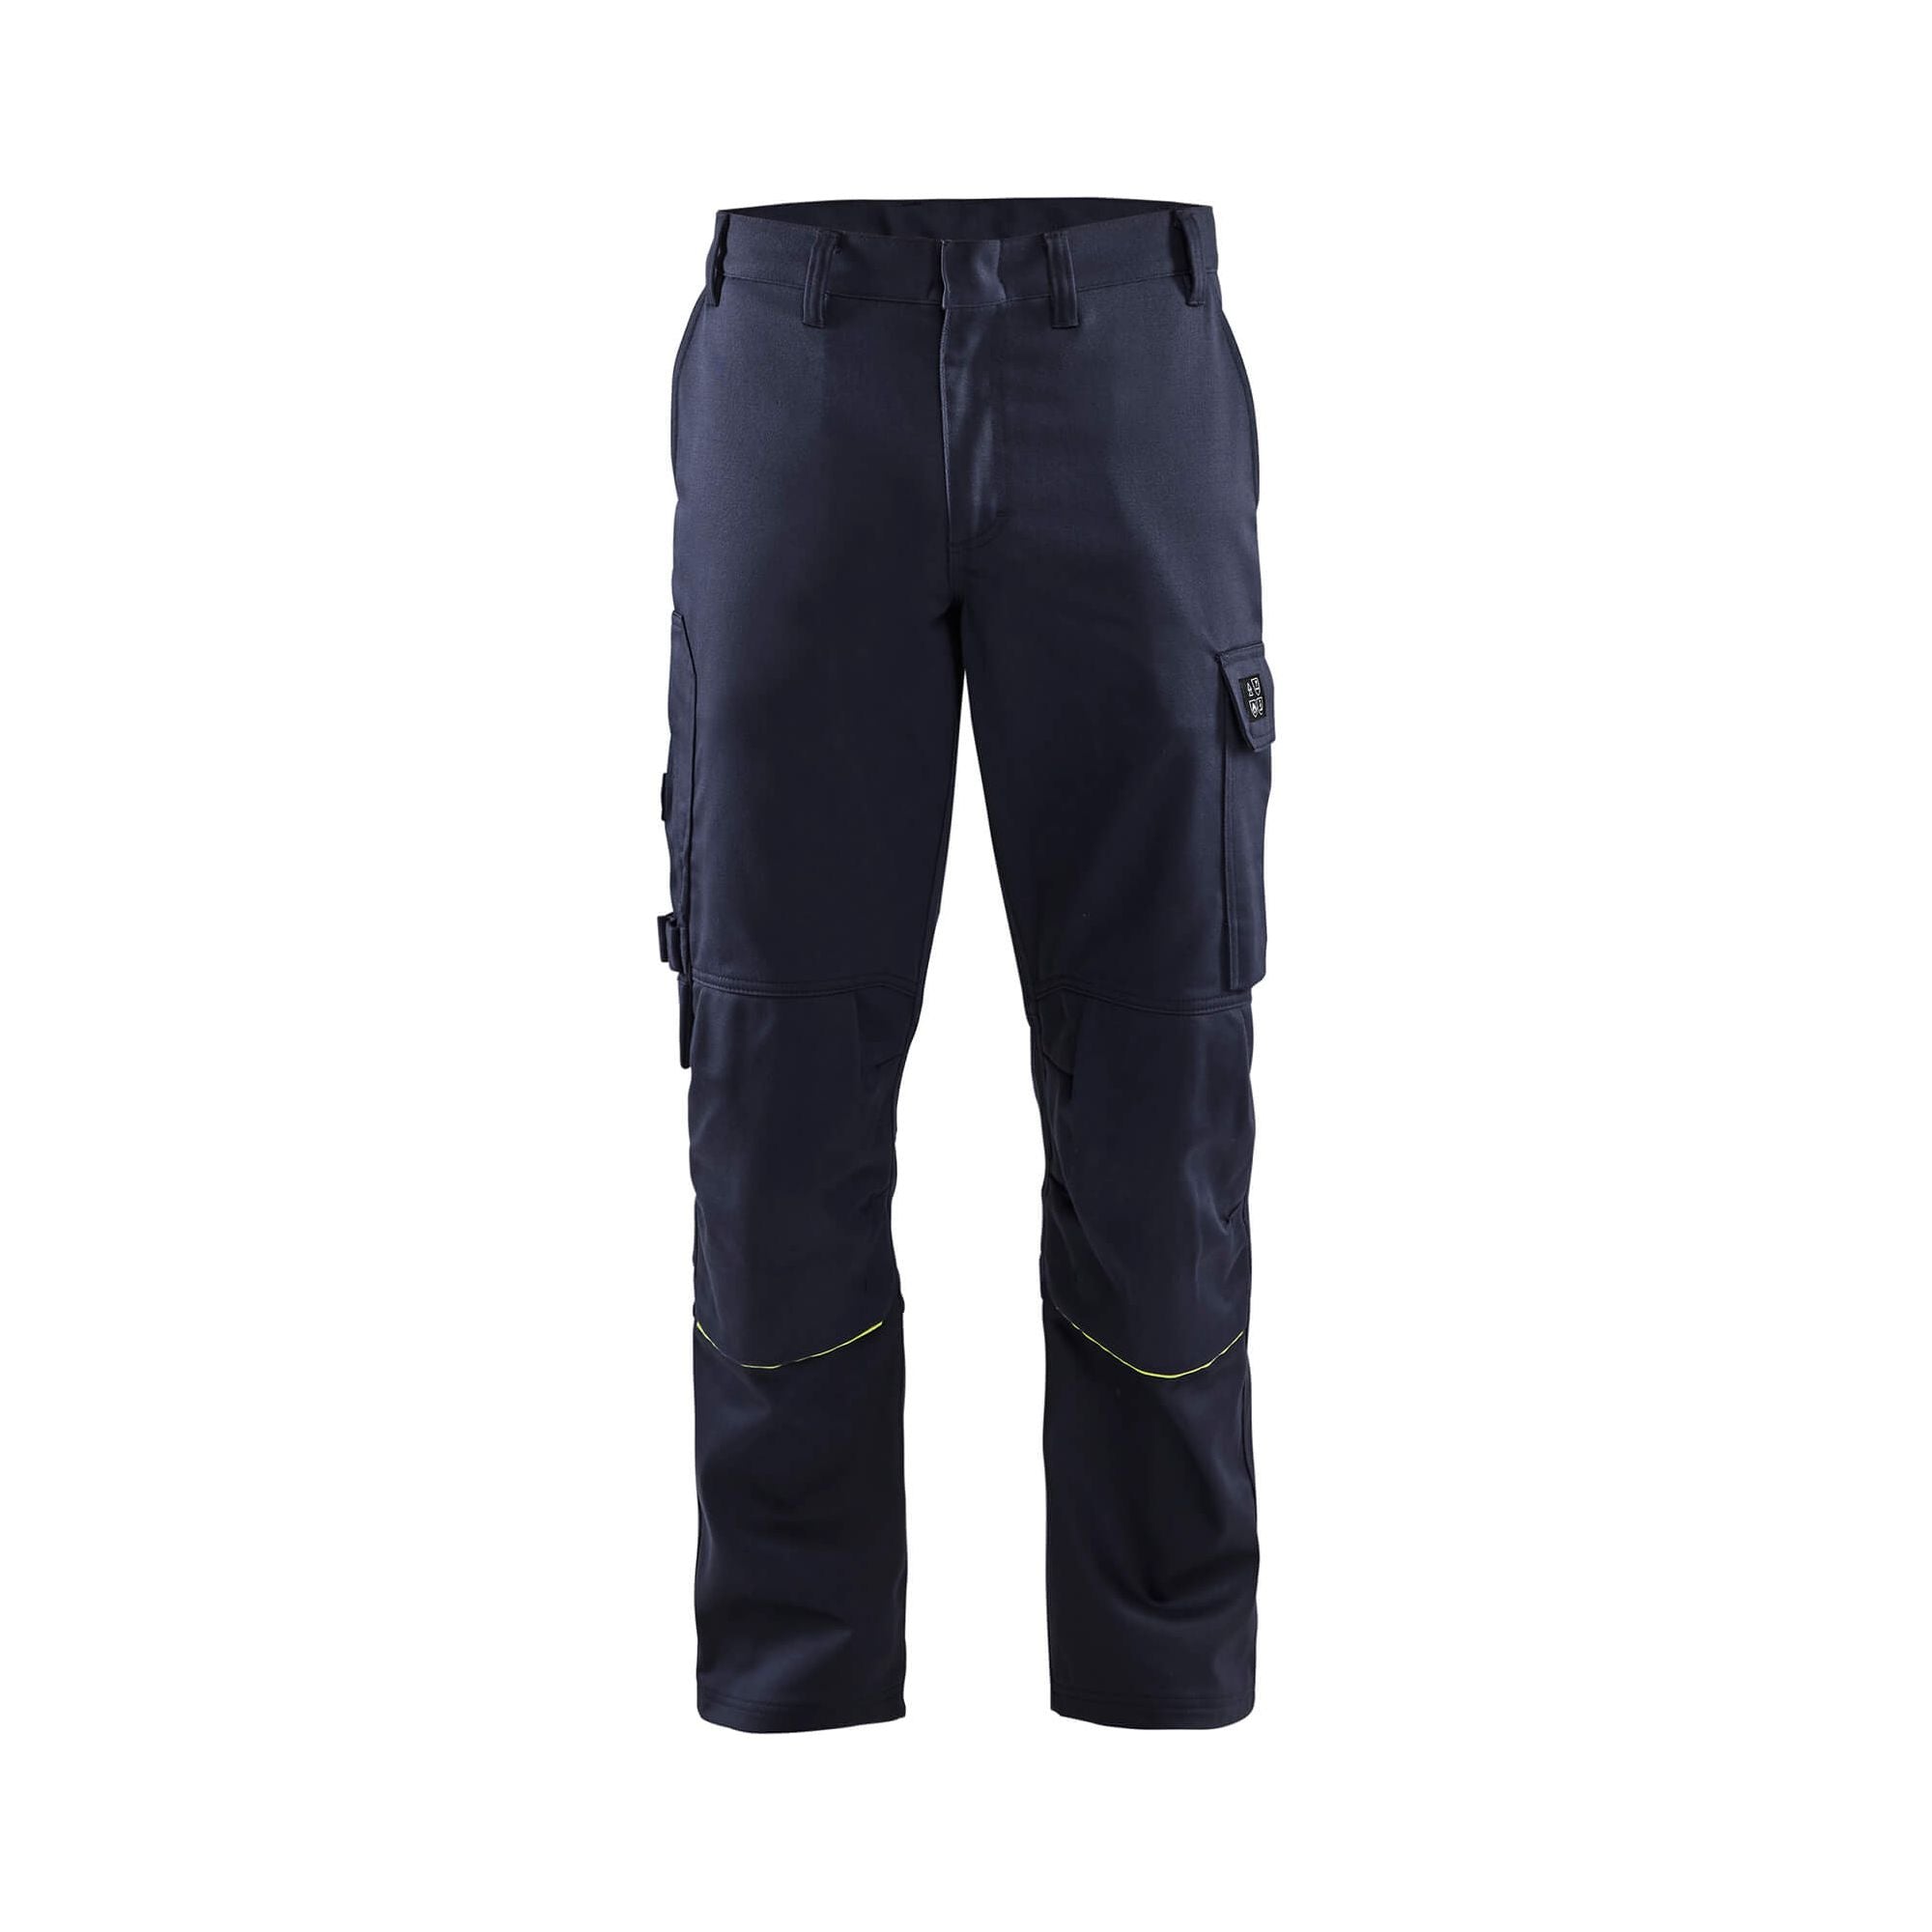 Portwest  Bizweld Flame Resistant Trousers  PW455